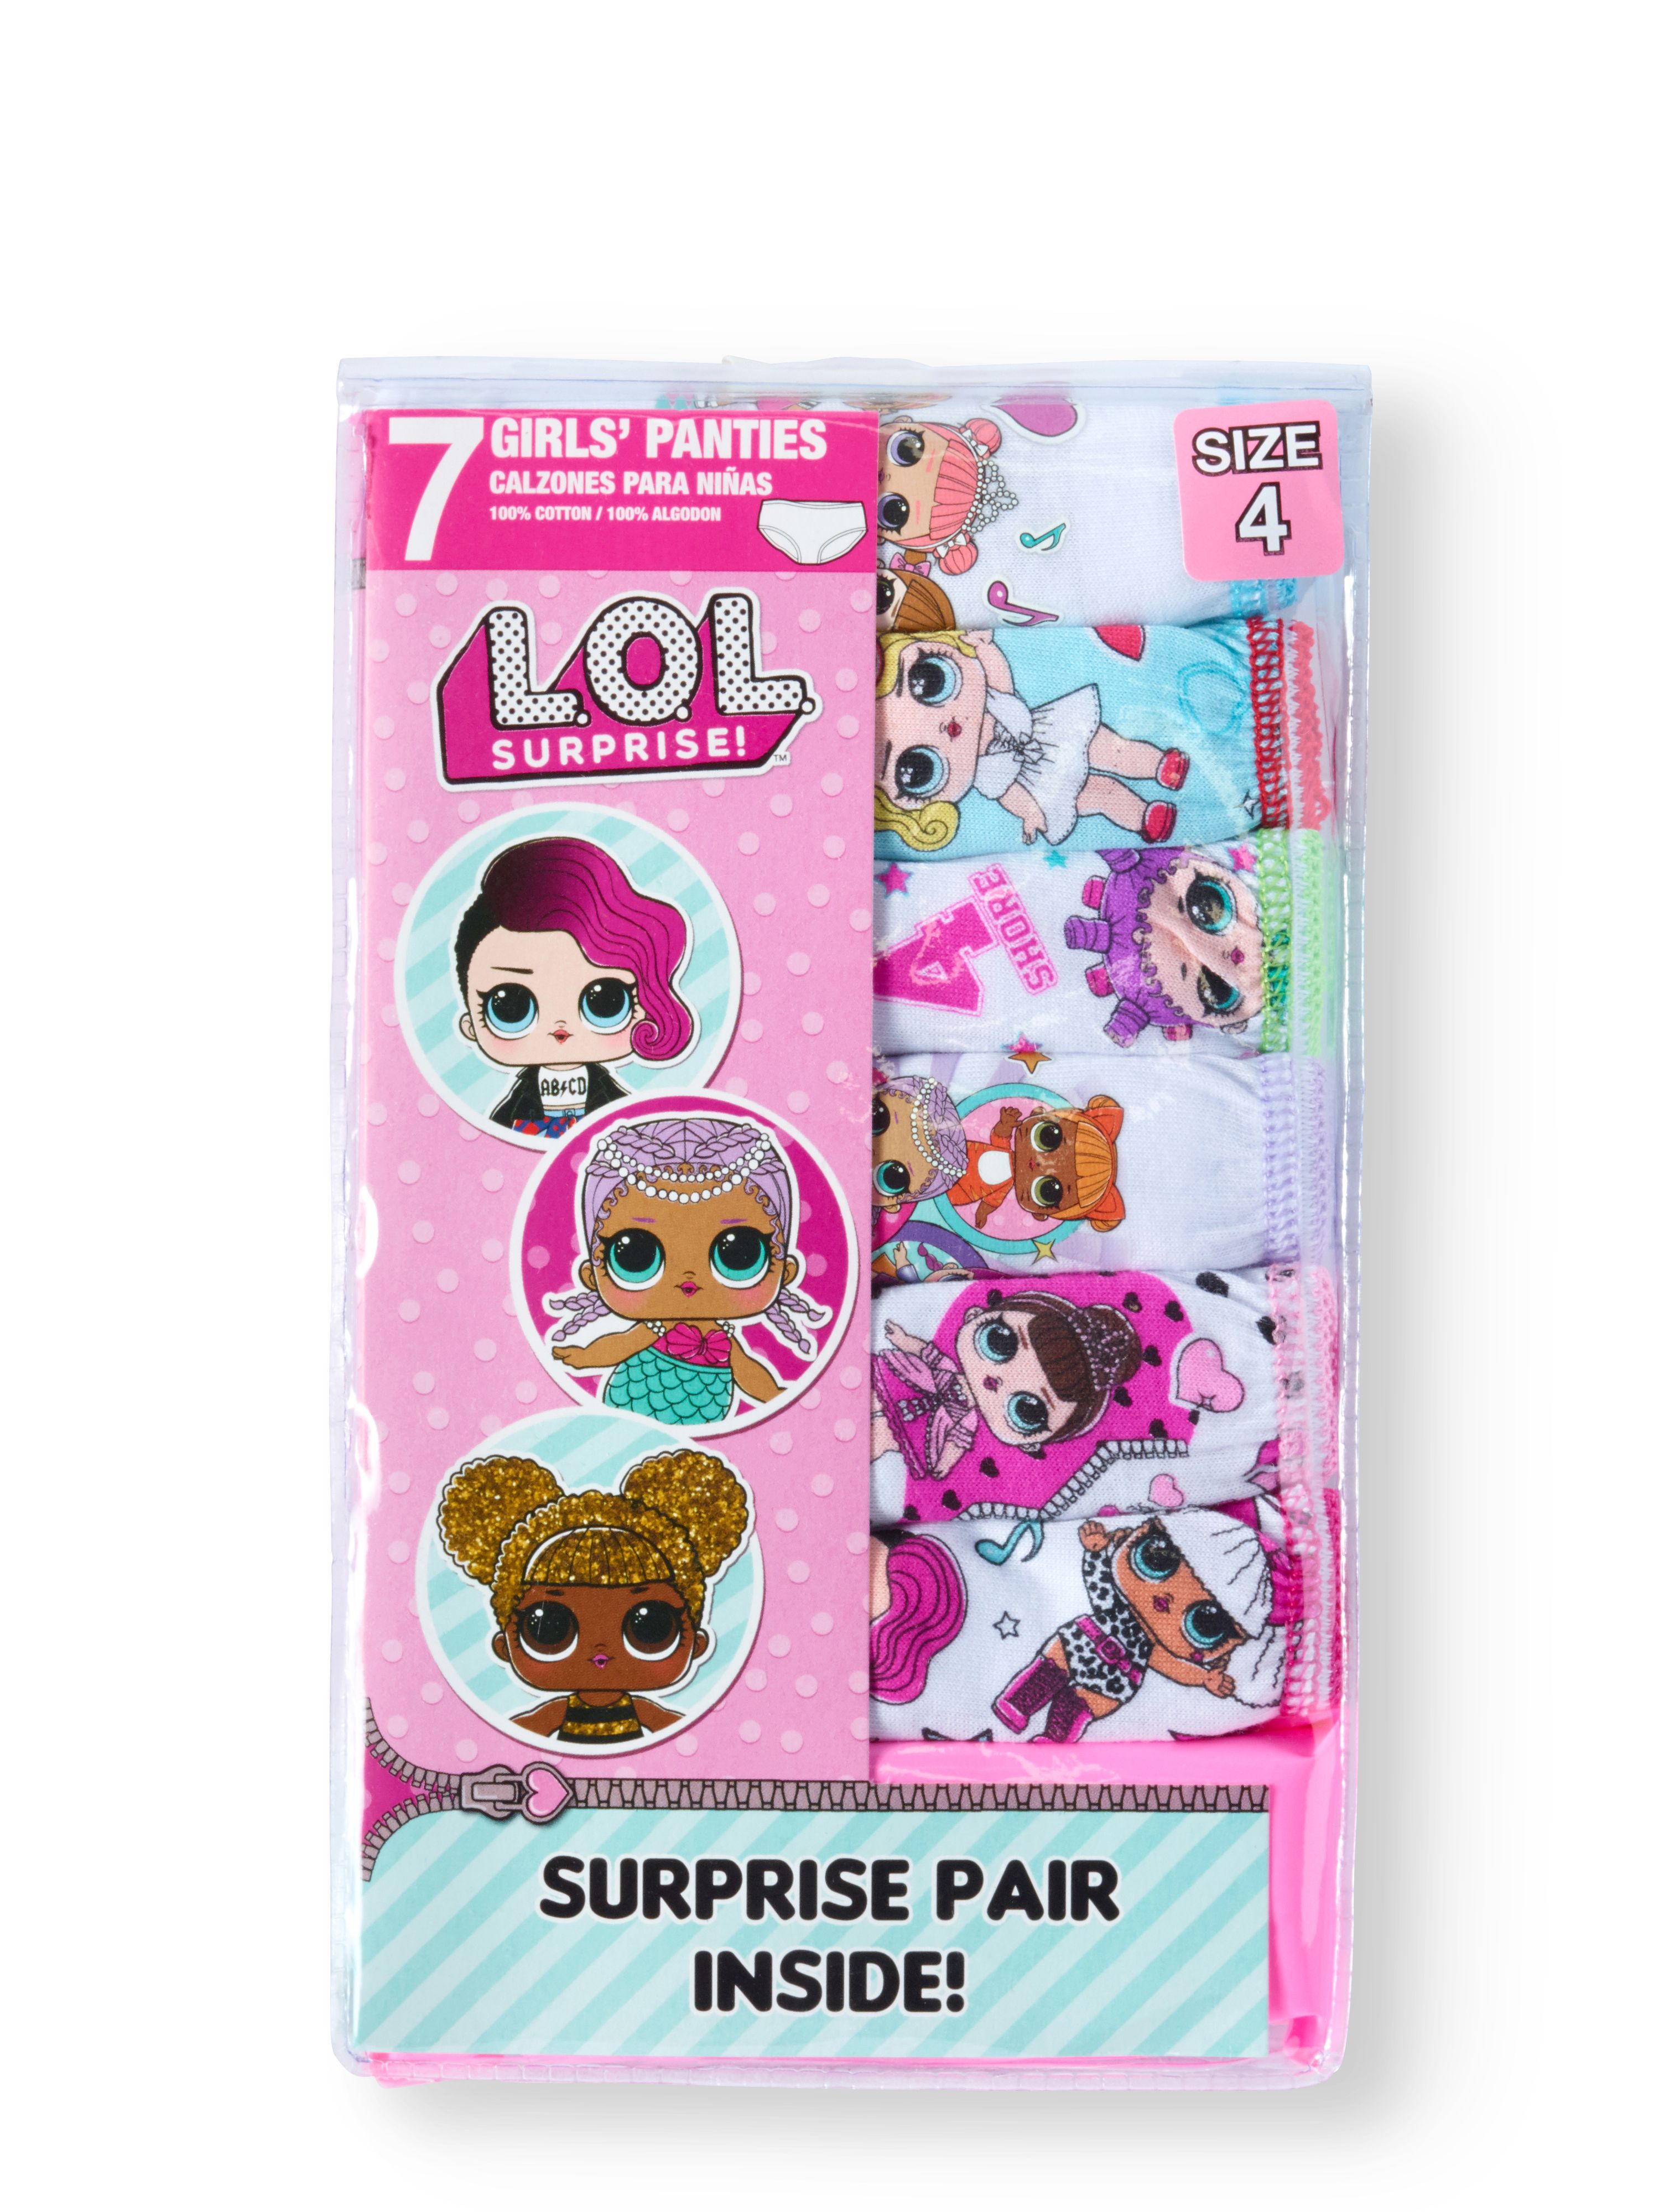 L.O.L. Surprise! Girls Underwear, 7 Pack Brief Panties Sizes 4 - 8 - image 2 of 3